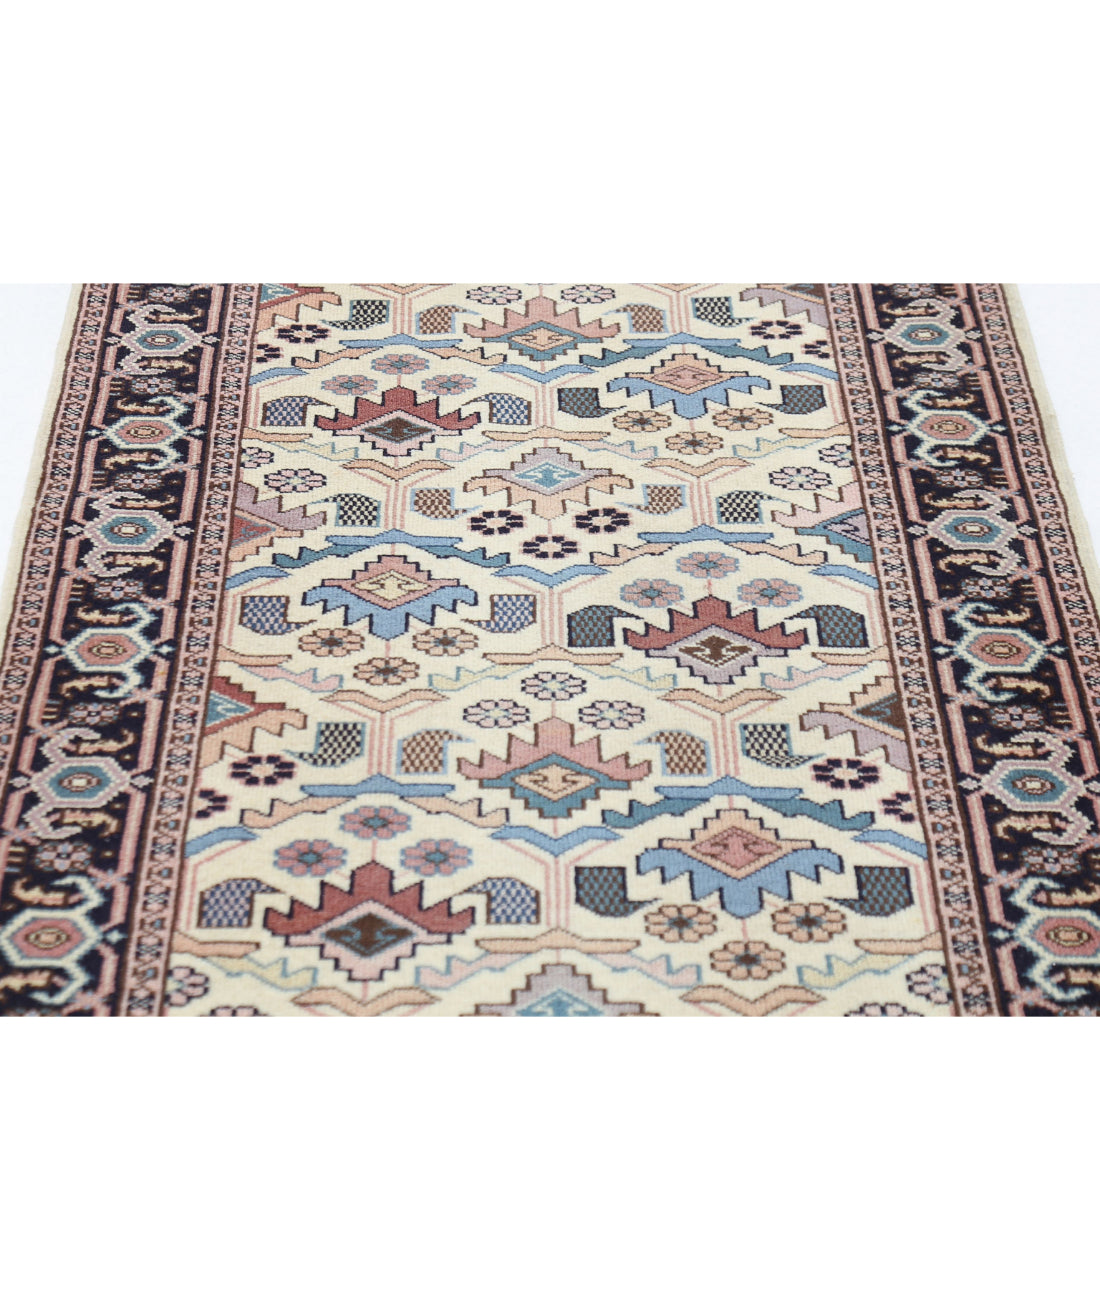 Hand Knotted Heritage Persian Style Wool Rug - 2'8'' x 13'7'' 2'8'' x 13'7'' (80 X 408) / Beige / Blue